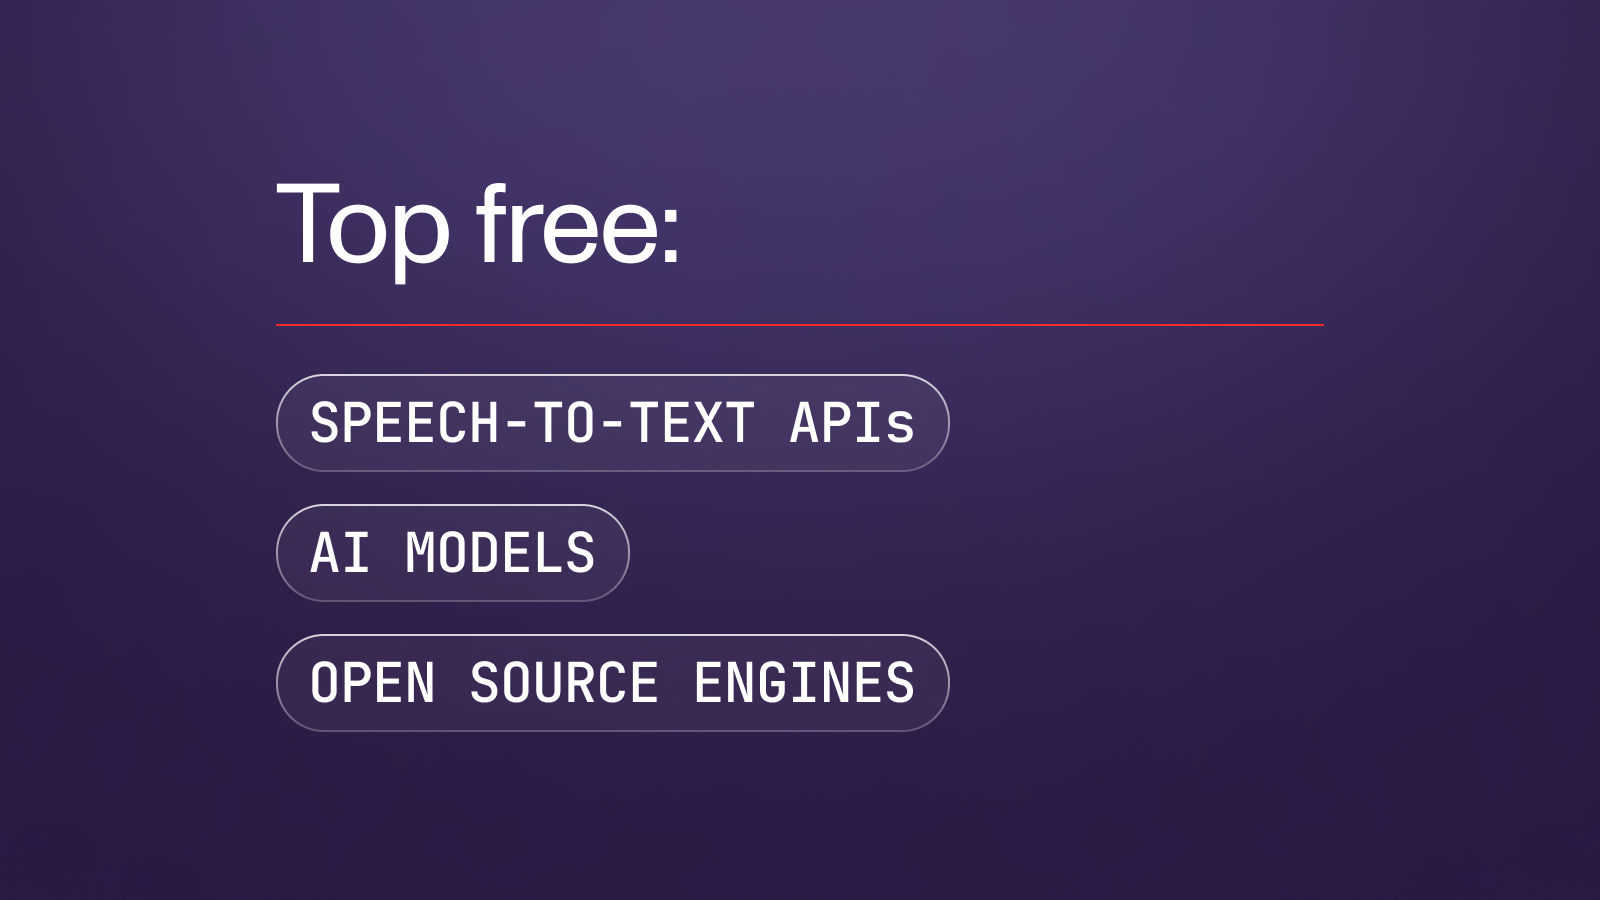 The Top Free Speech-to-Text APIs, AI Models, and Open Source Engines